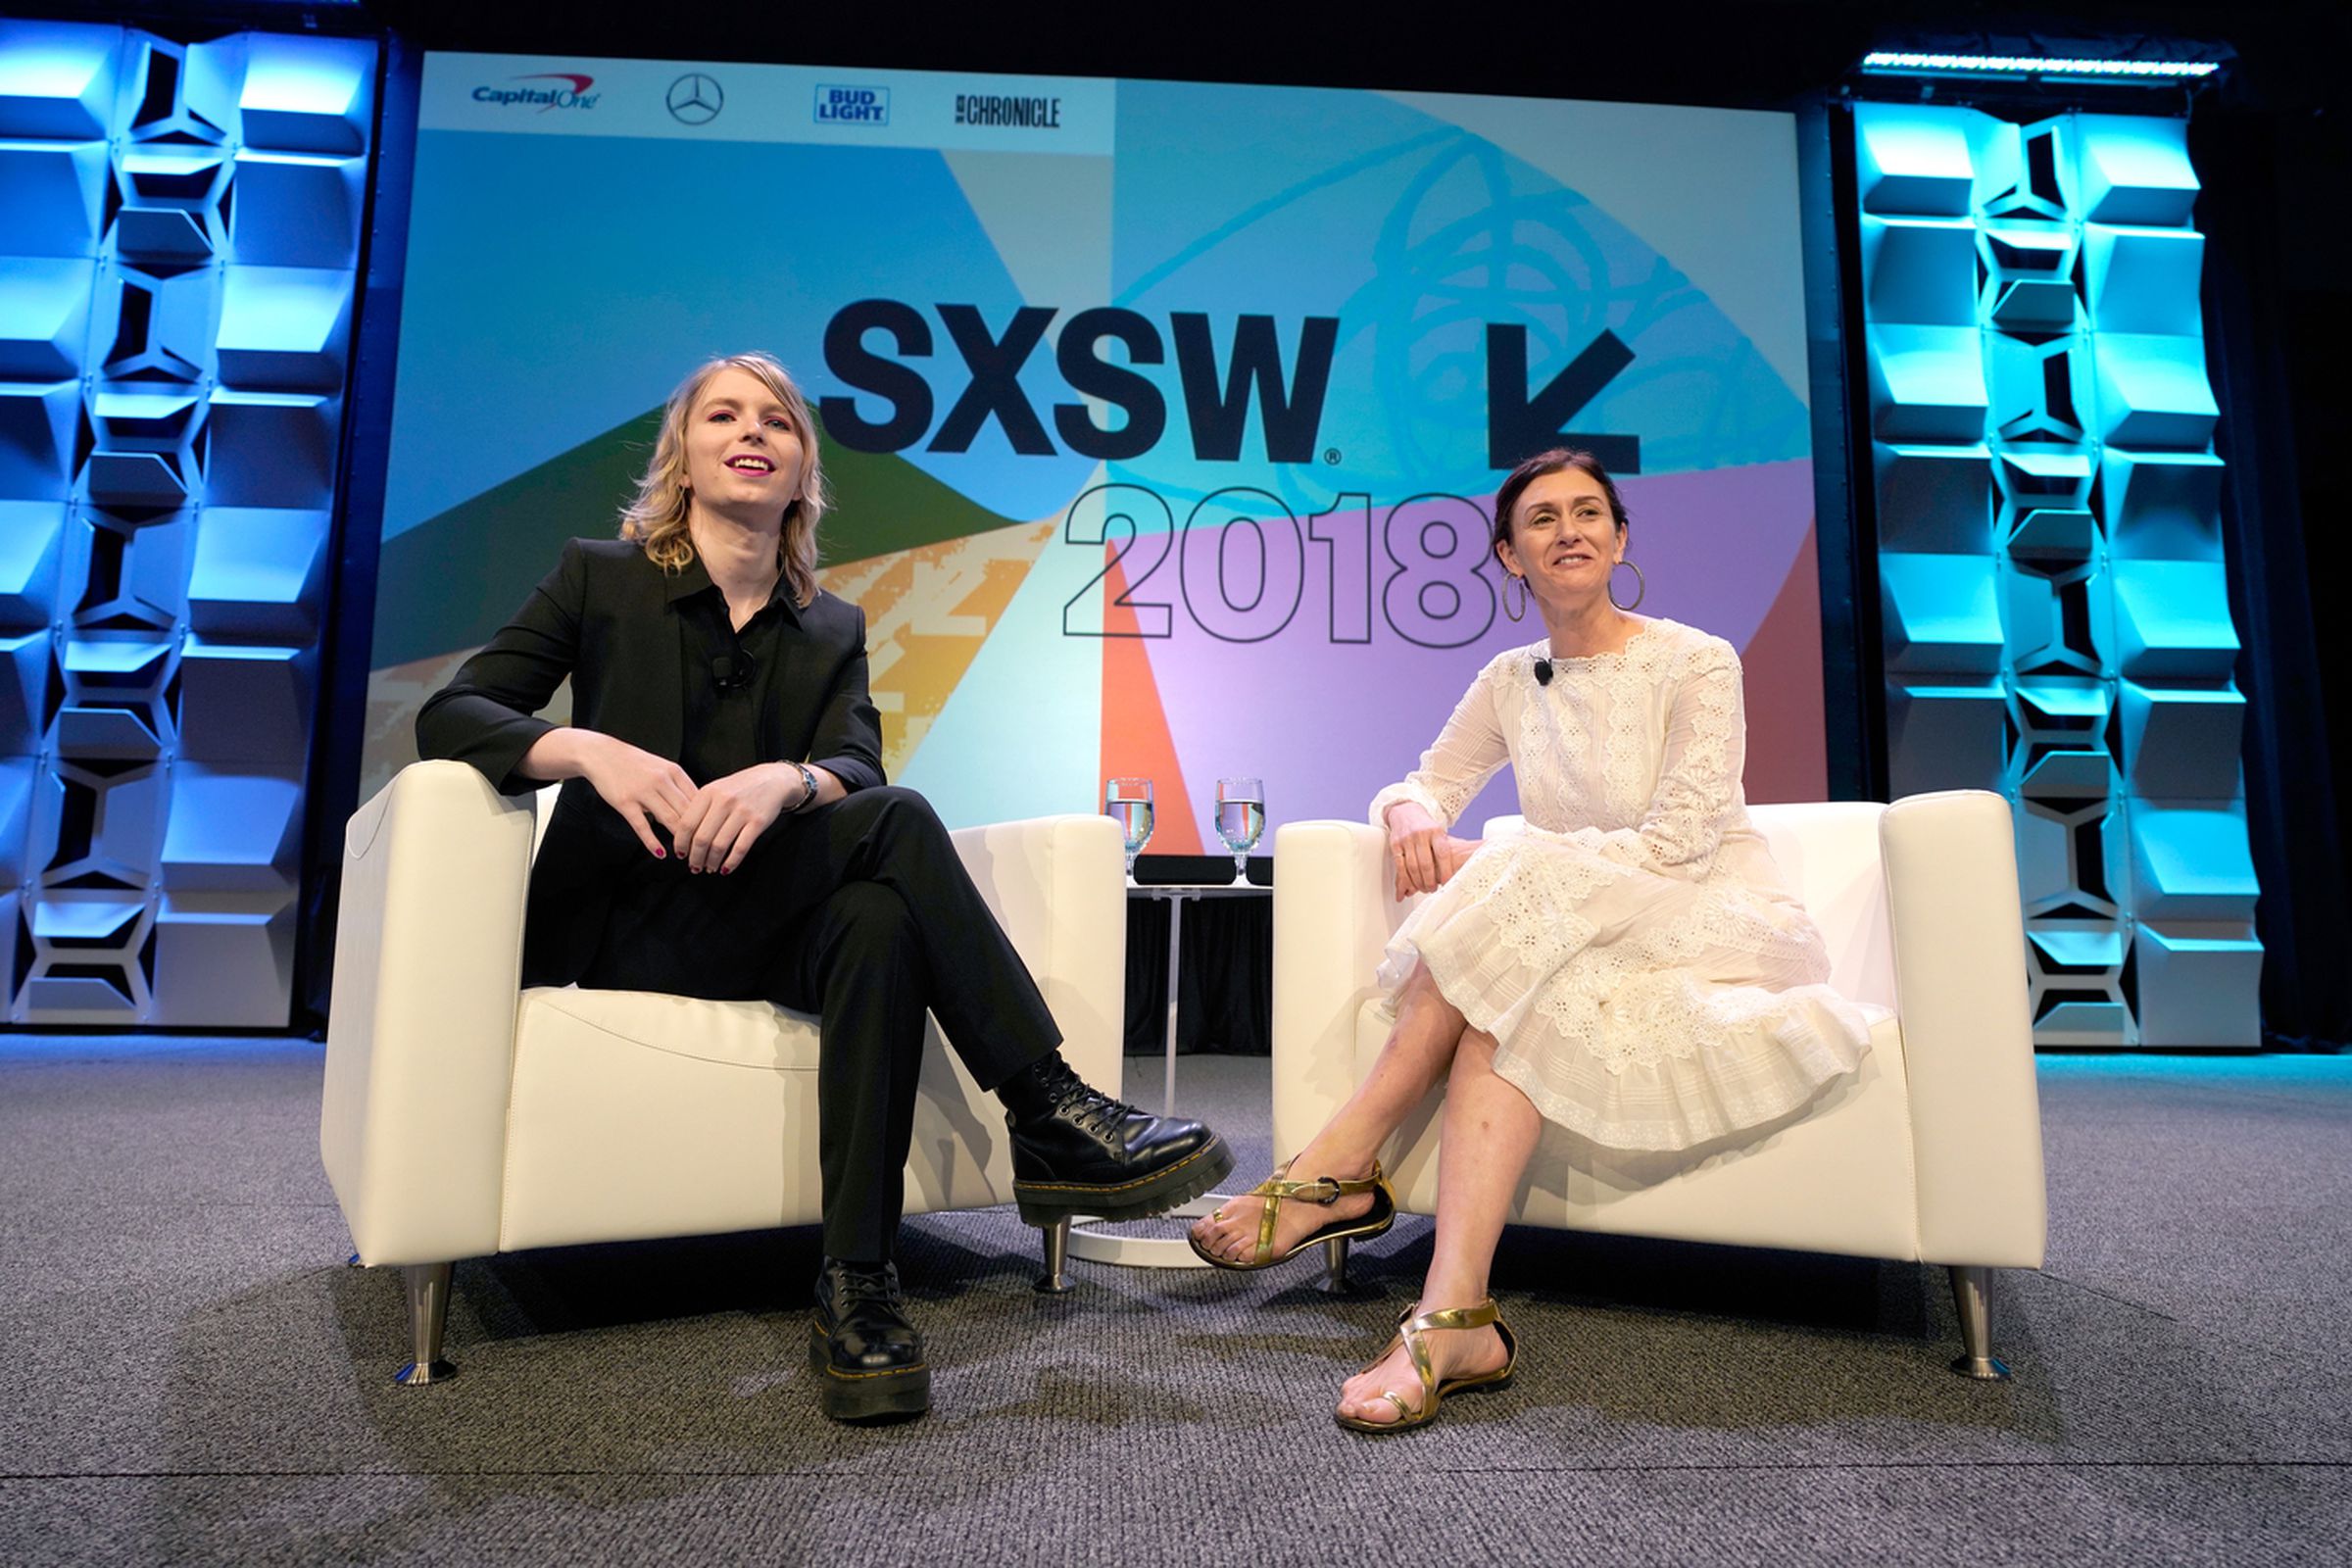 Chelsea Manning at SXSW